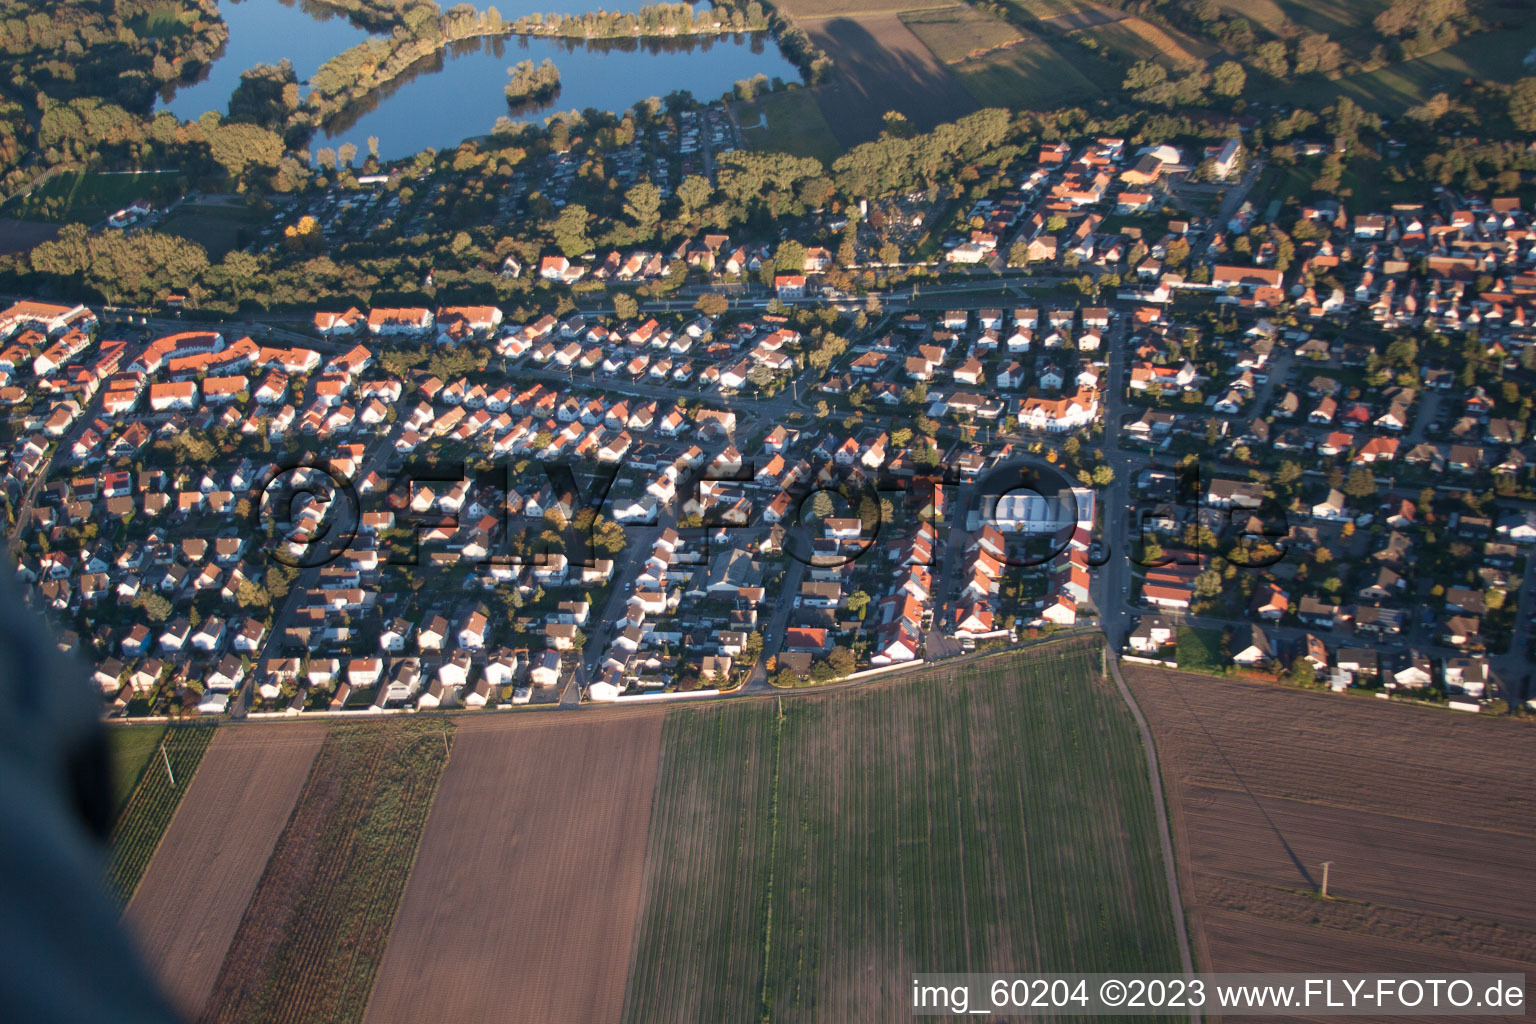 Aerial view of Germersheim in the state Rhineland-Palatinate, Germany